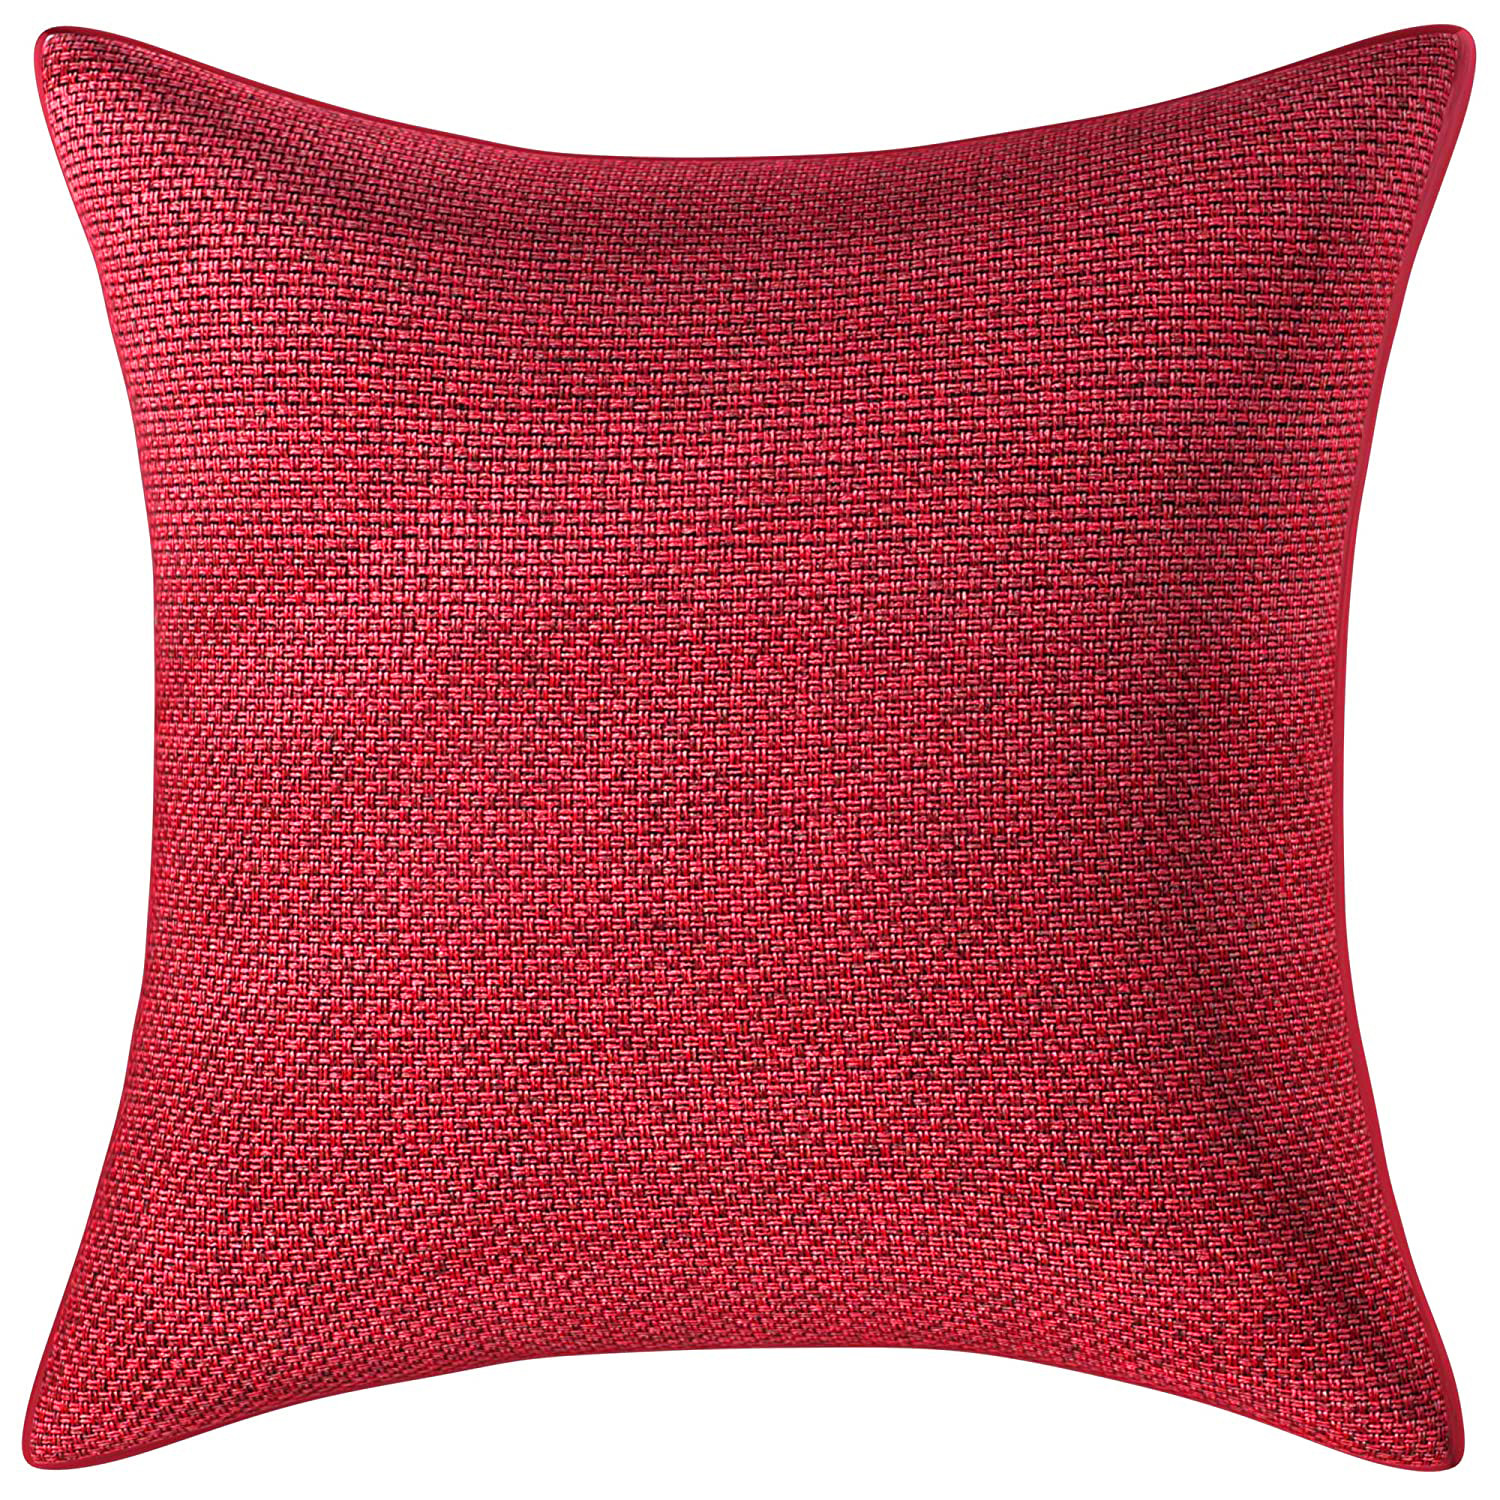 Kuber Industries Jute Blend Decorative Square Throw Pillow Cover Cushion Covers Pillowcase, Home Decor Decorations for Sofa Couch Bed Chair 24x24 Inch- (Maroon)